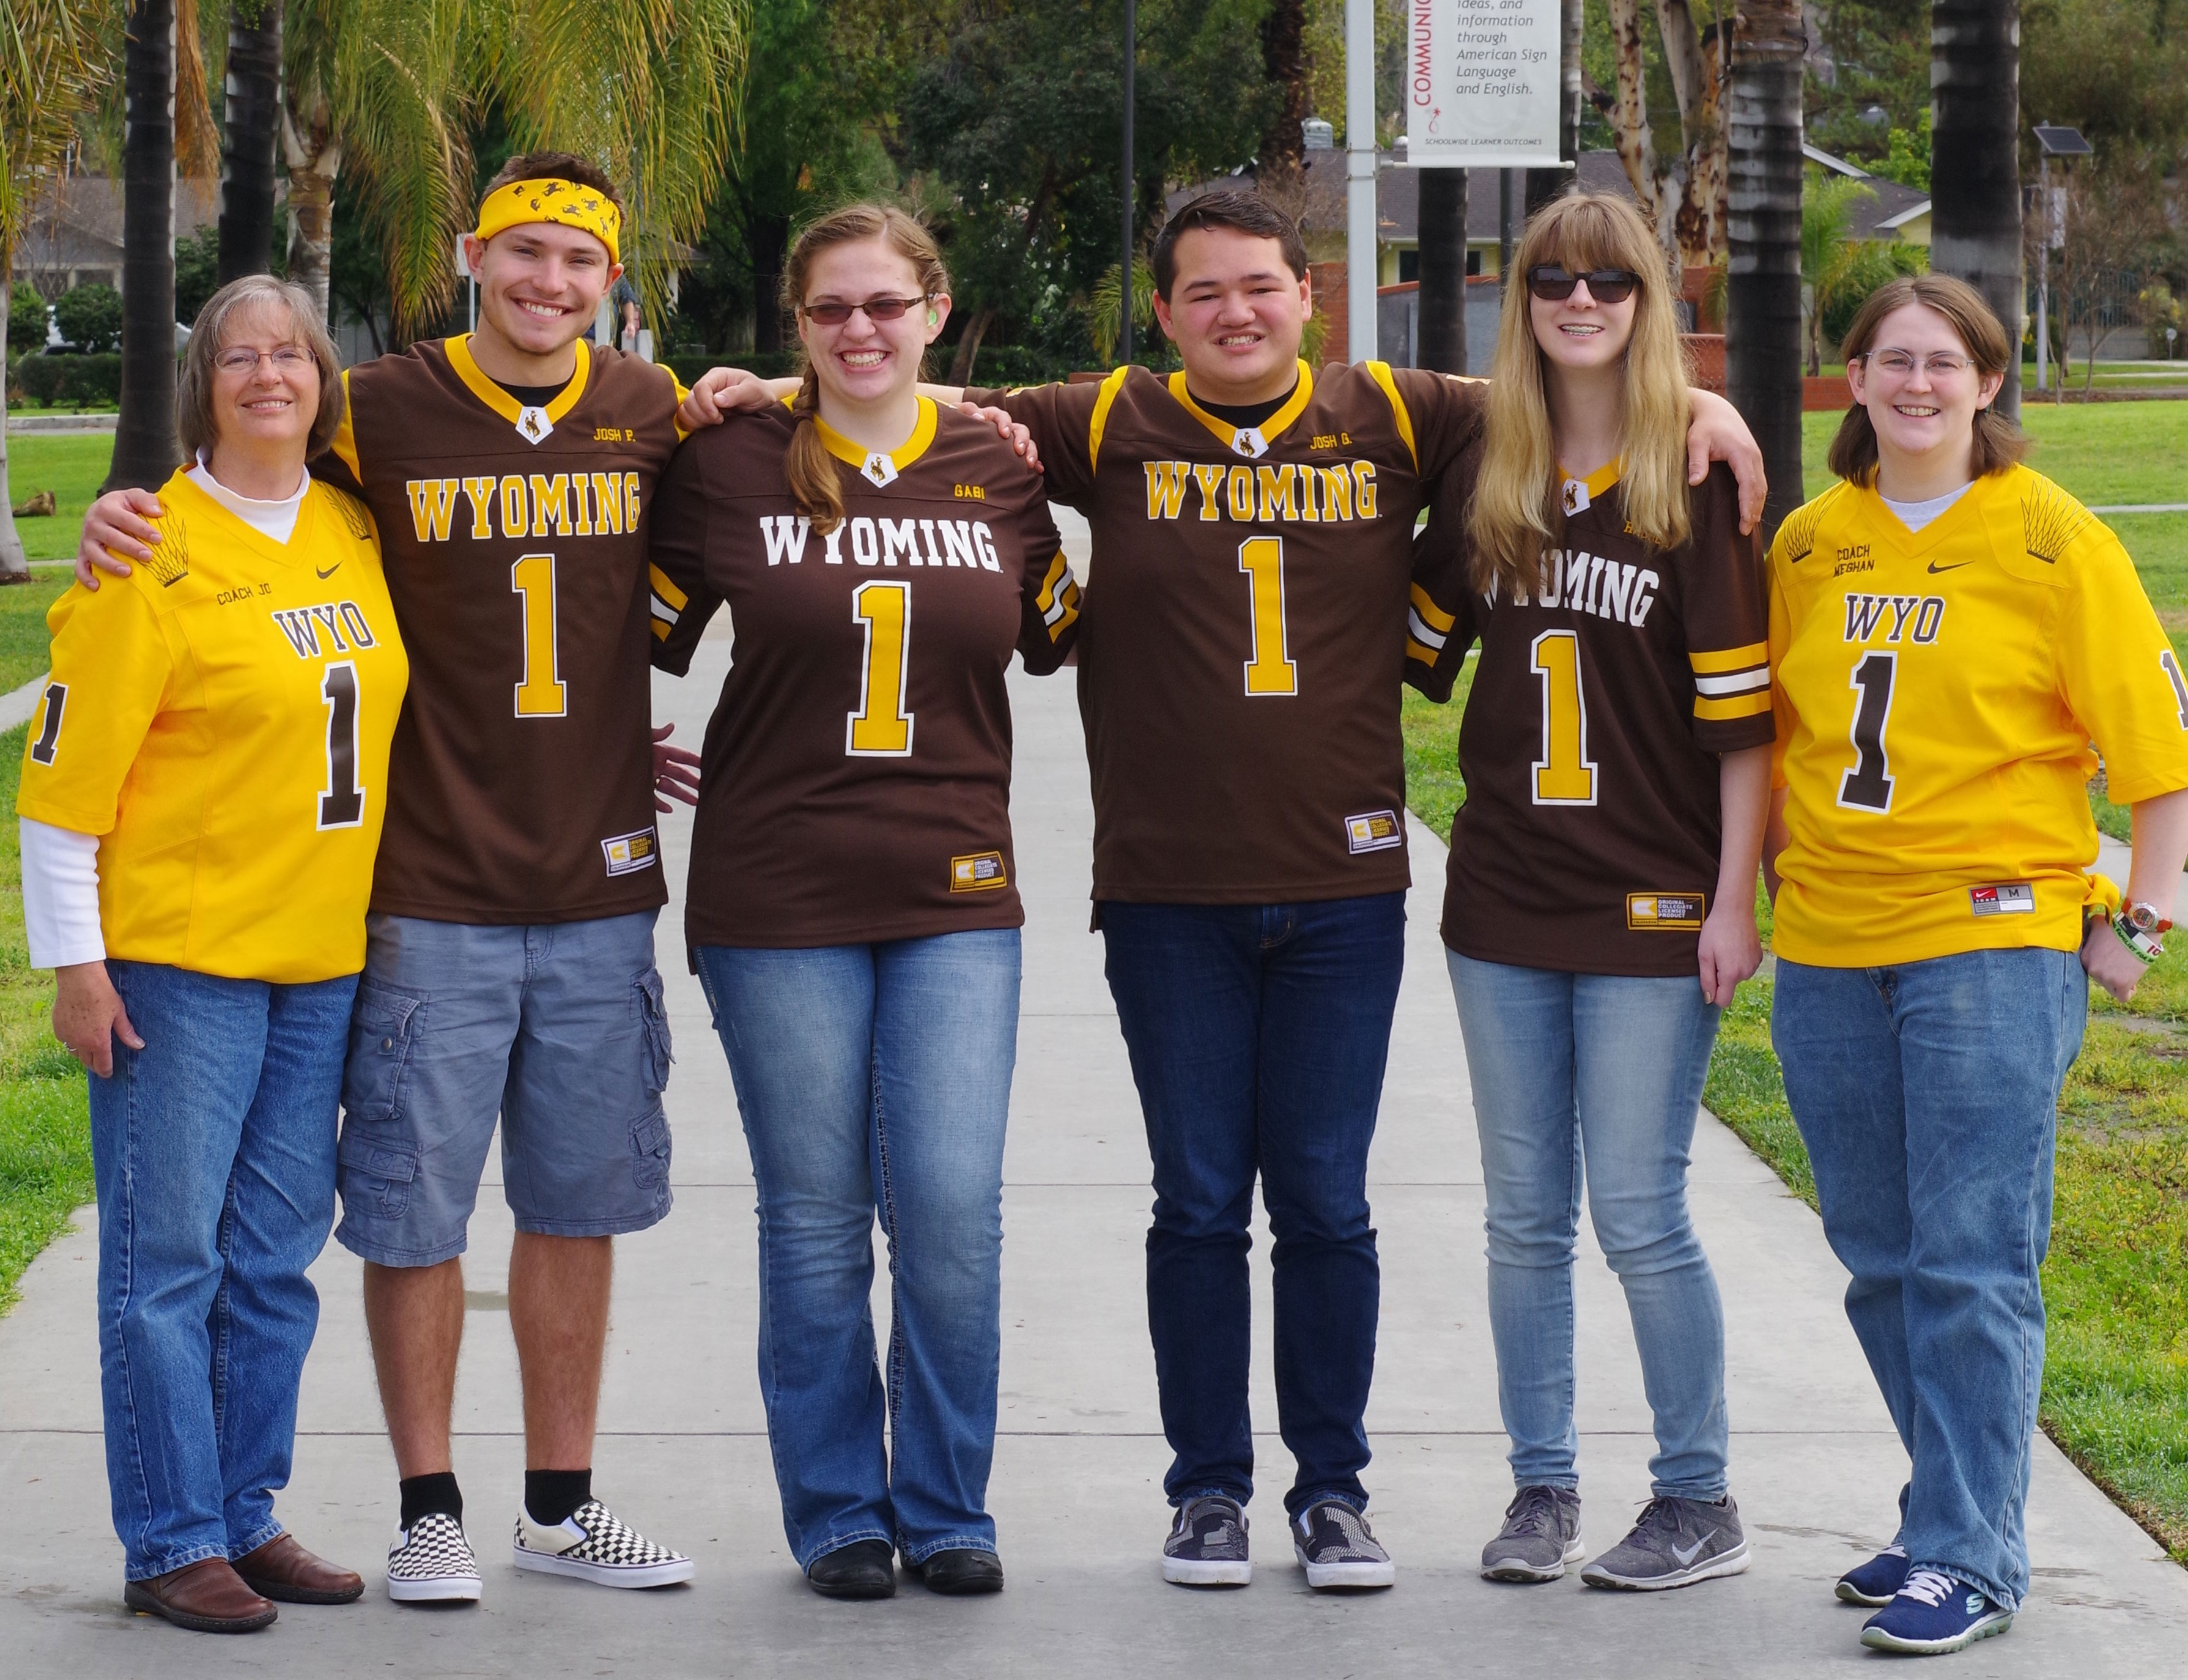 The Academic Bowl team members and coaches all proudly wearing Wyoming football jerseys while in sunny California for the West Regionals.